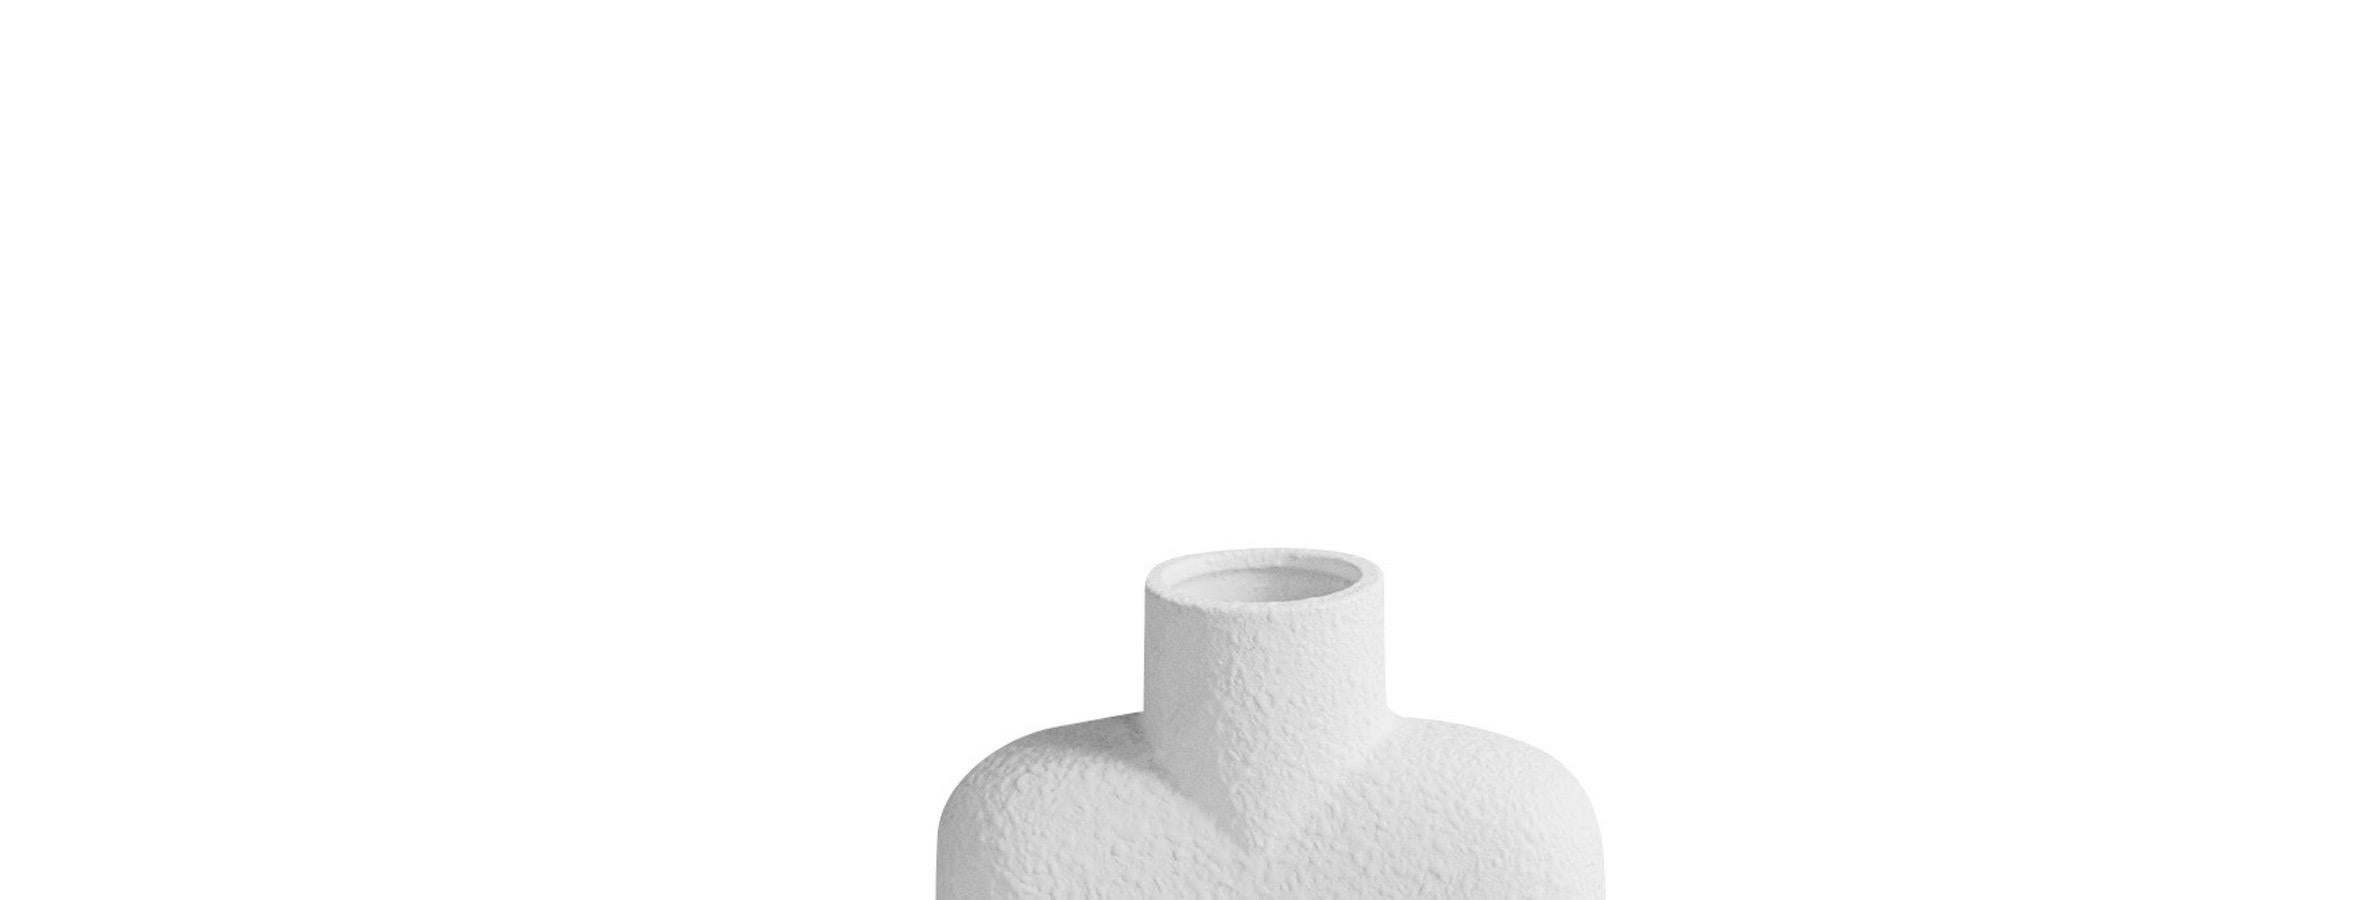 Contemporary Danish design small textured white ceramic vase with center round spout on a base of two round spheres.
Very sculptural in design.
Same shape different sizes available S5602 and S5615.


 